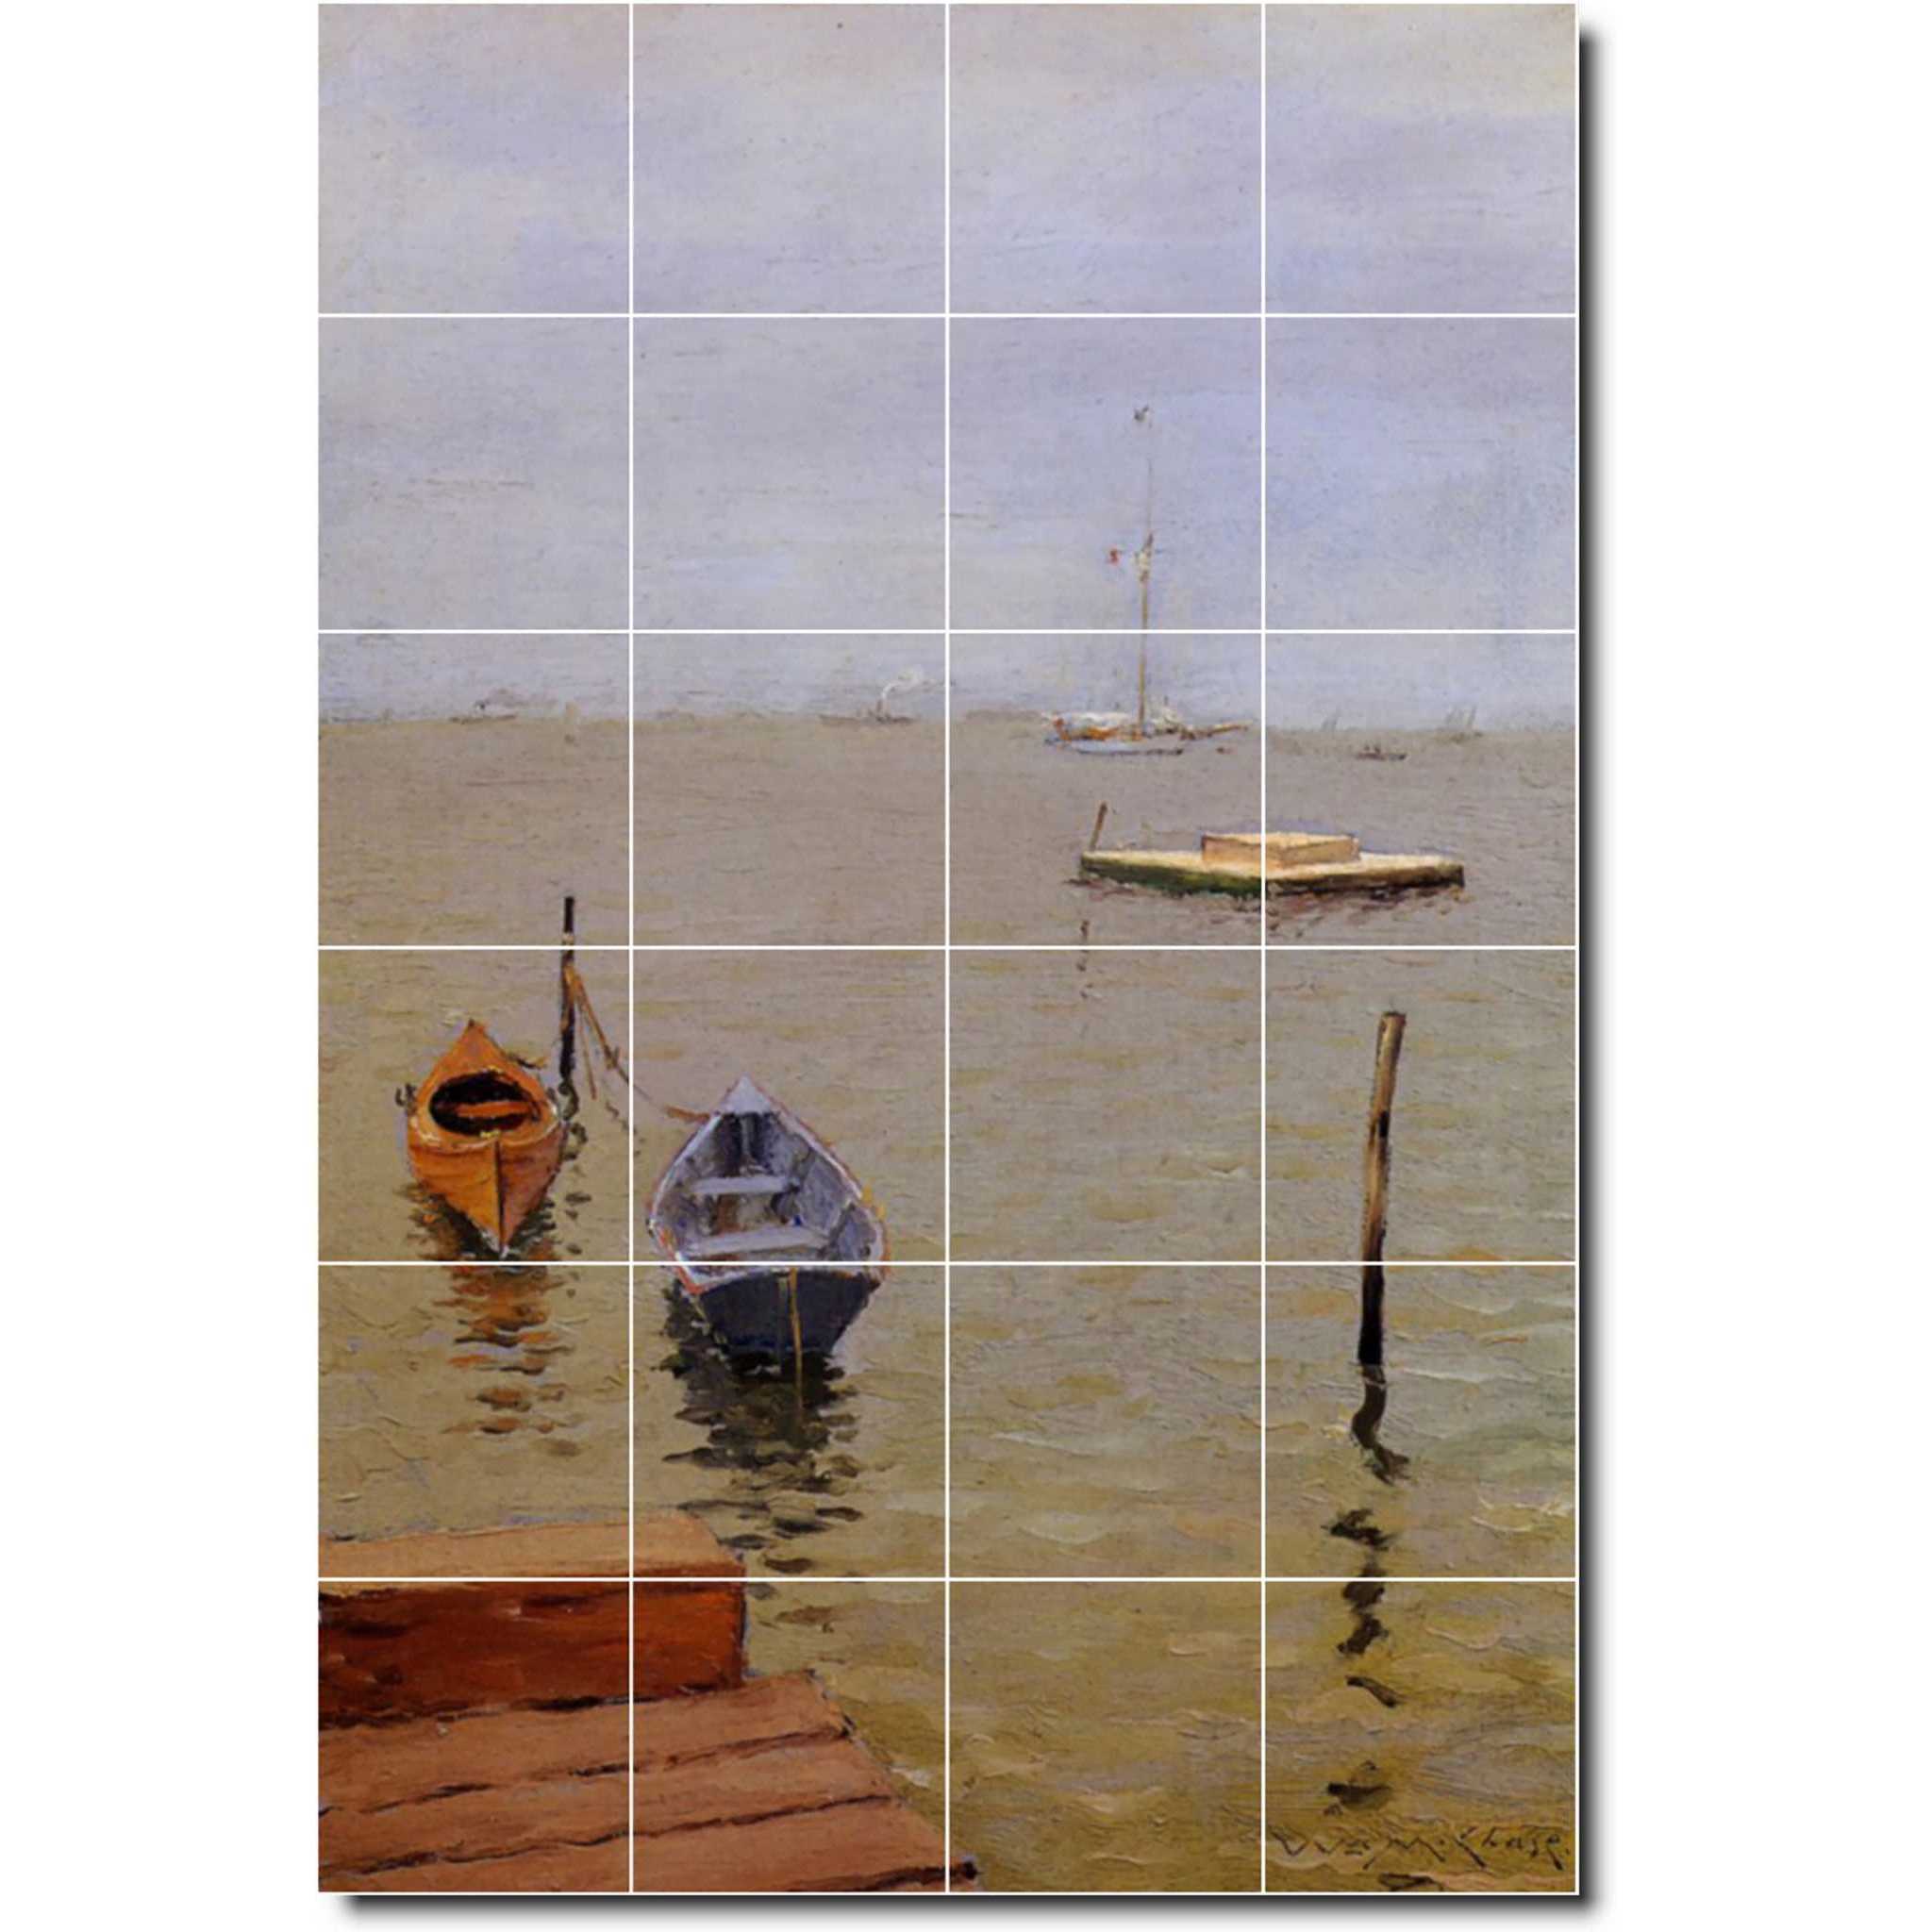 william chase waterfront painting ceramic tile mural p01640